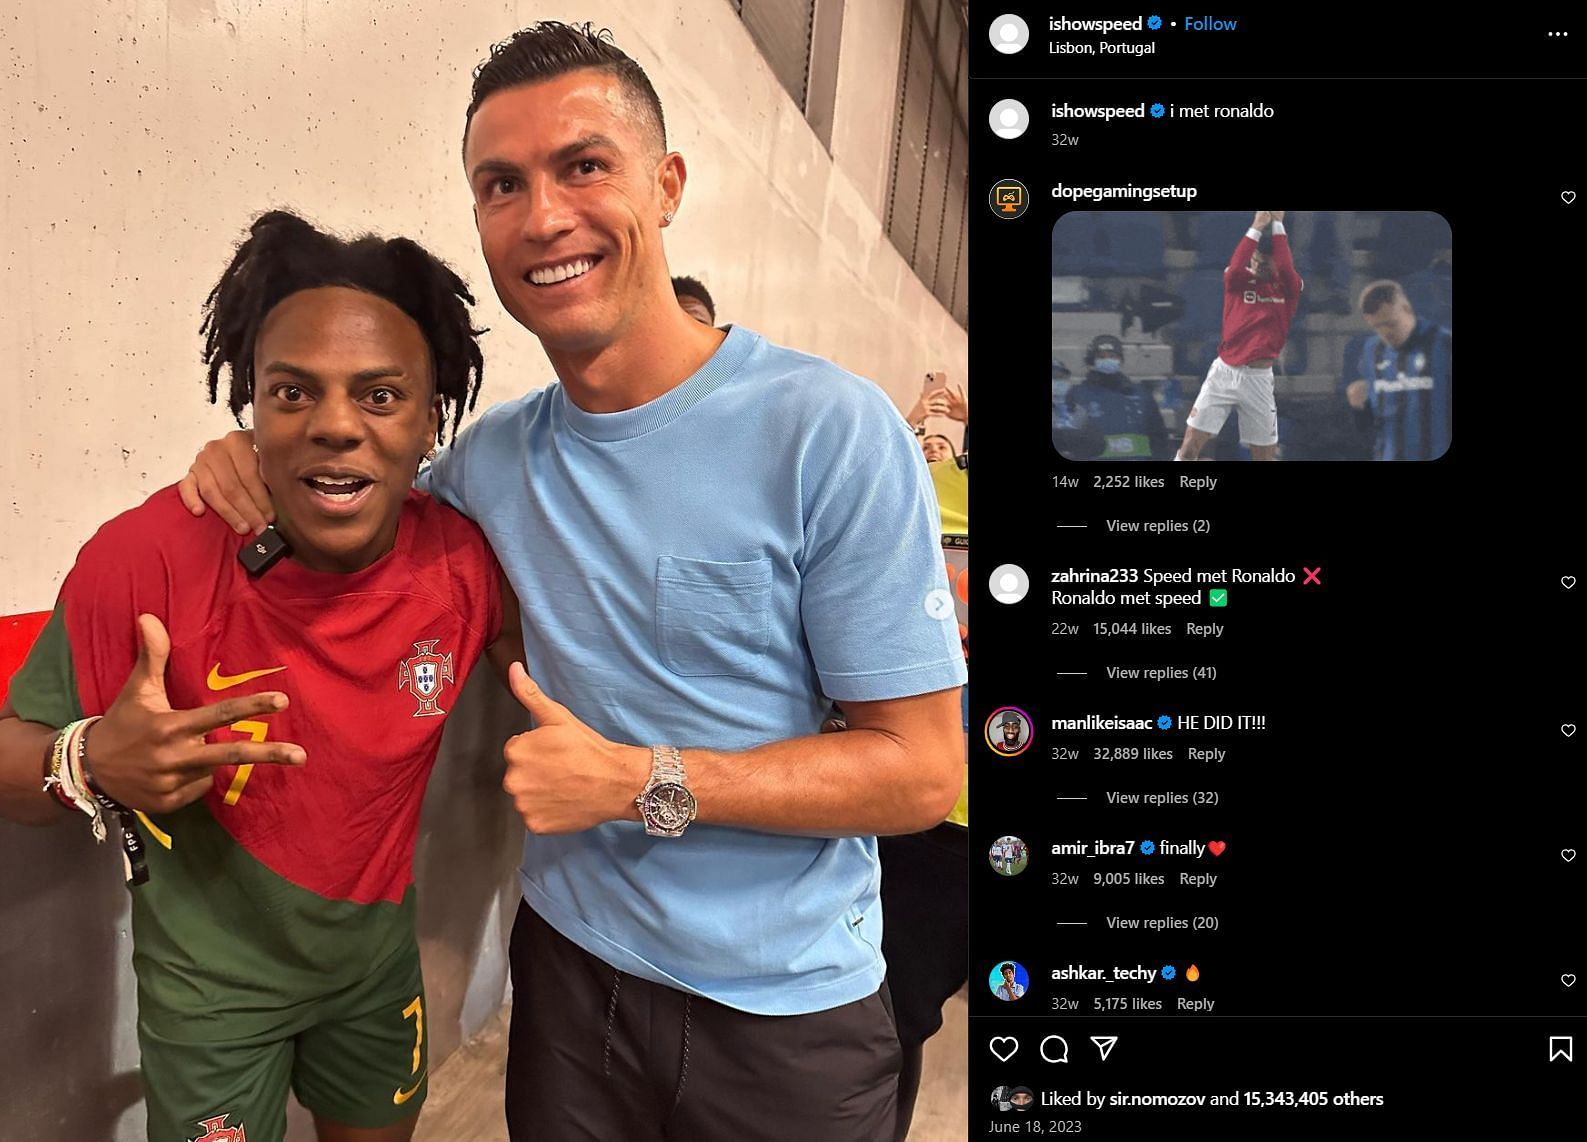 The Instagram post in which the streamer met with Ronaldo, dated June 18, 2023 (Image via IShowSpeed/Instagram)